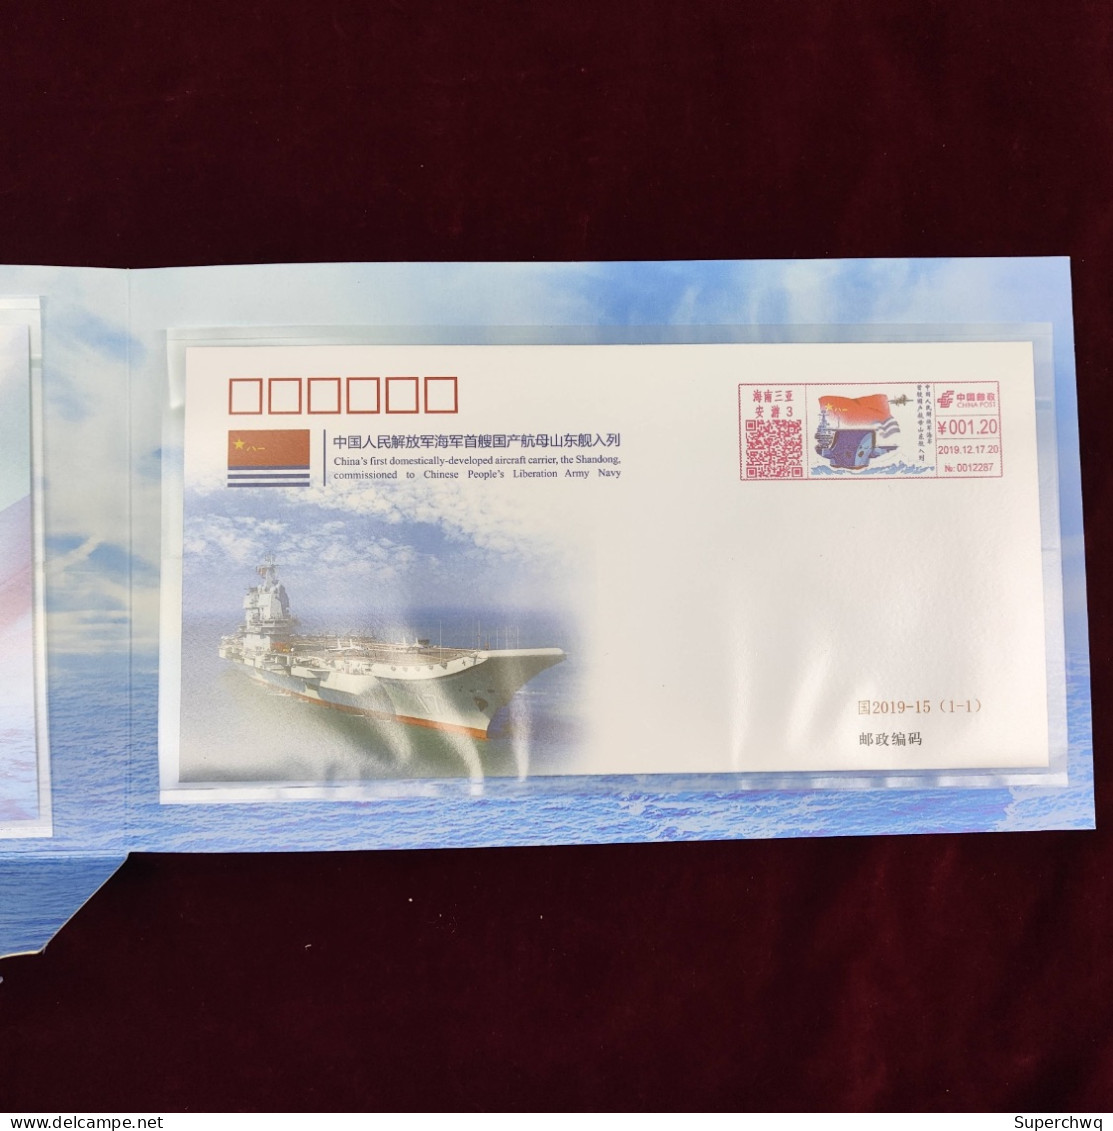 China stamp The stamp cover of the first domestically produced aircraft carrier of the Chinese Navy, Shandong, has been